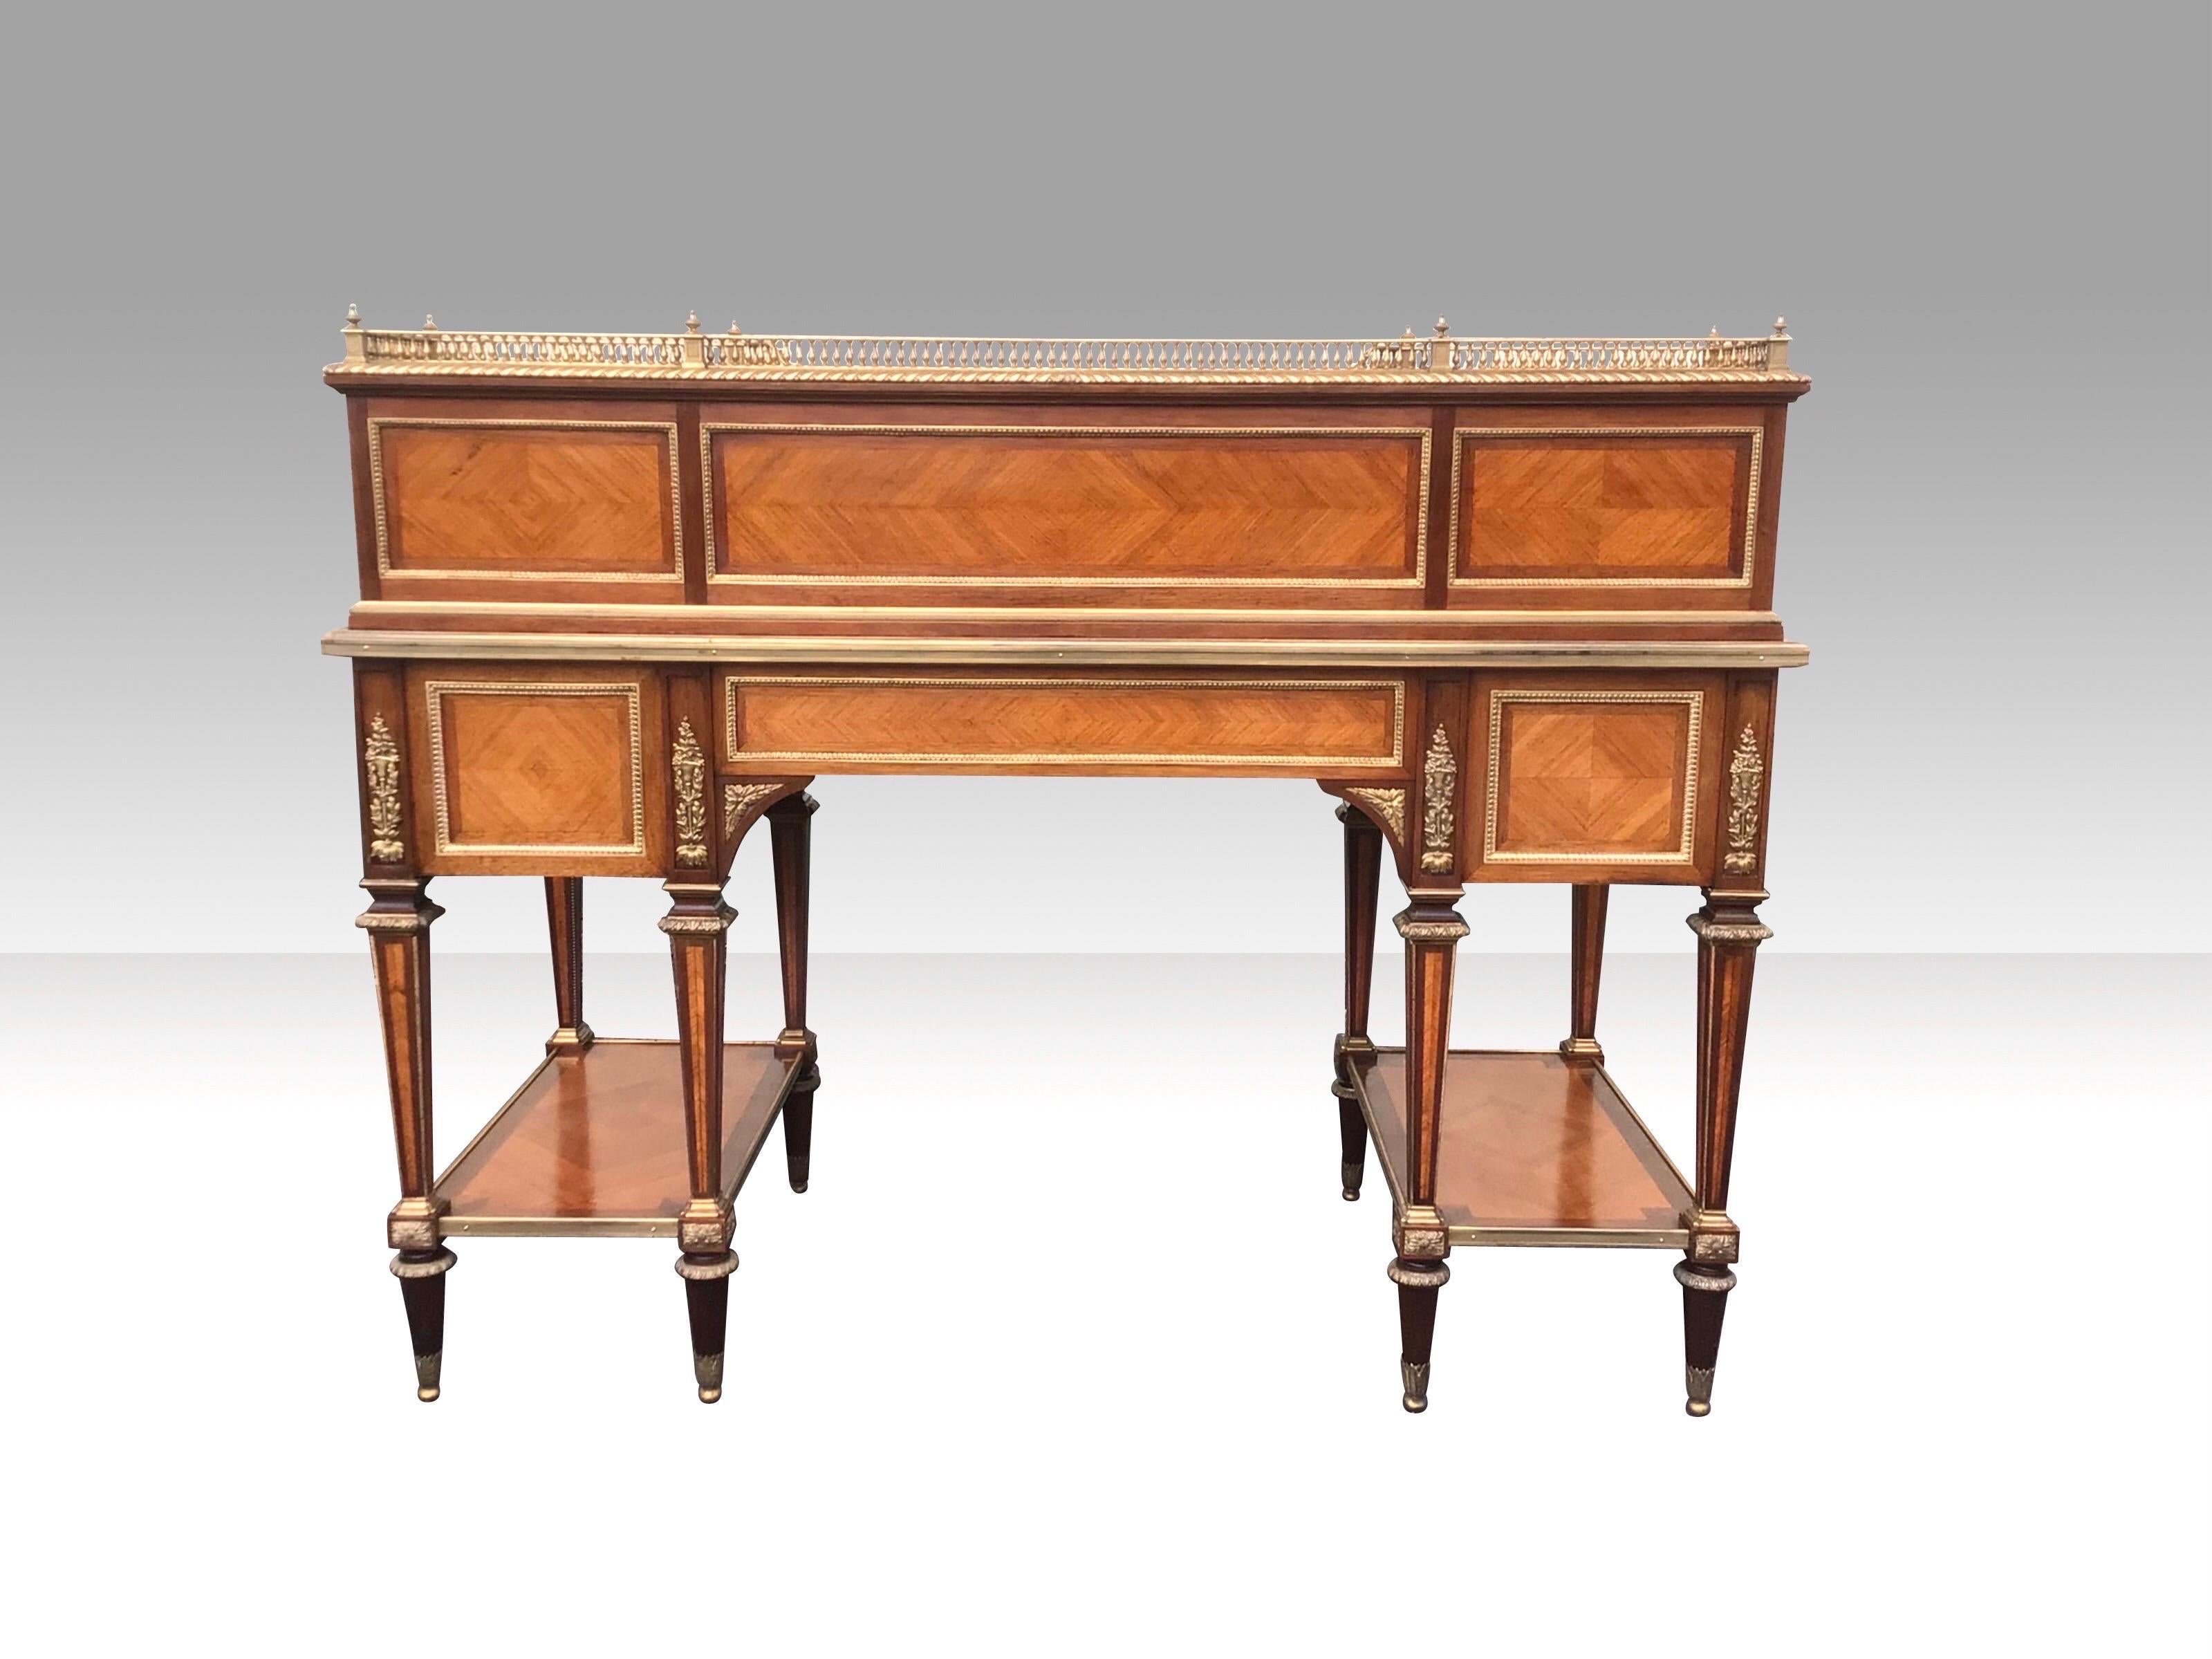 Exhibition quality antique French ormolu mounted Kingwood desk stamped by the important Paris furniture maker J Werner 
circa 1860 .
This desk has been expertly crafted with Kingwood and superb Rosewood cross banding and Kingwood inlaid